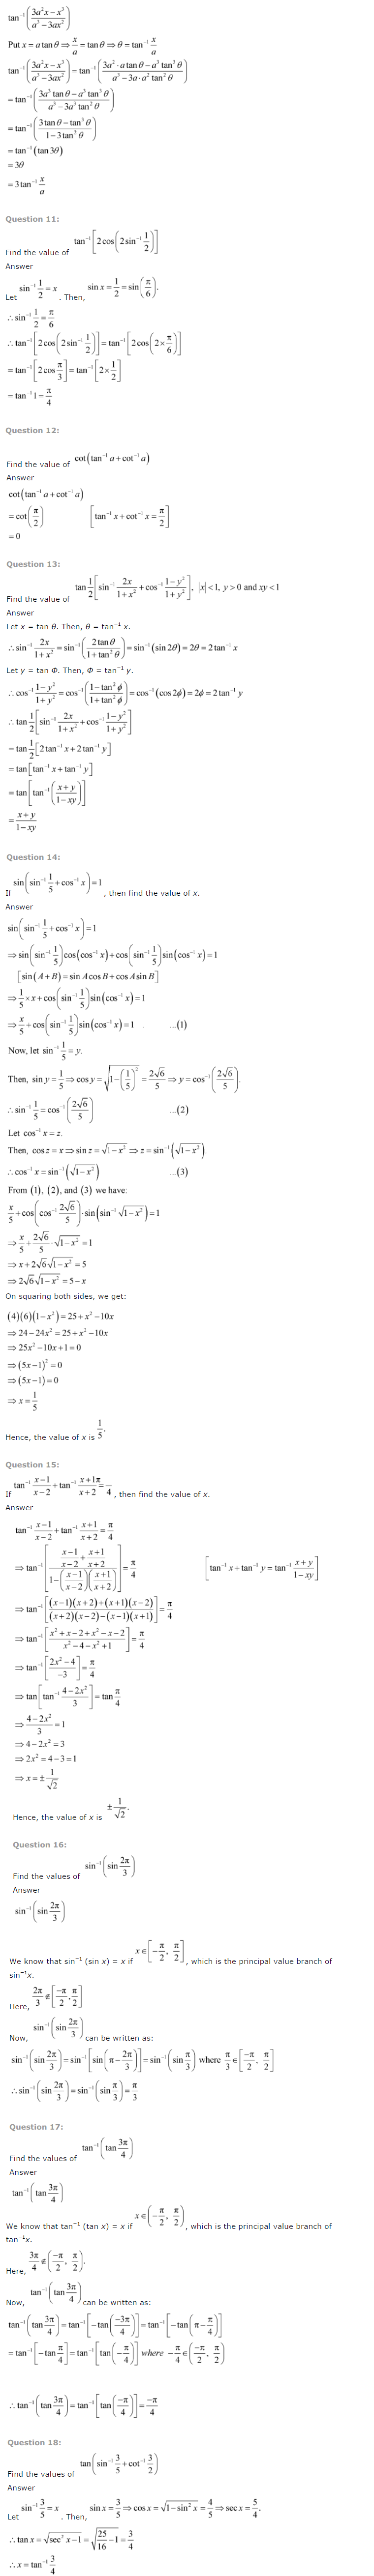 NCERT Solutions For Class 12 Maths Chapter 2 Inverse Trigonometric Functions 3